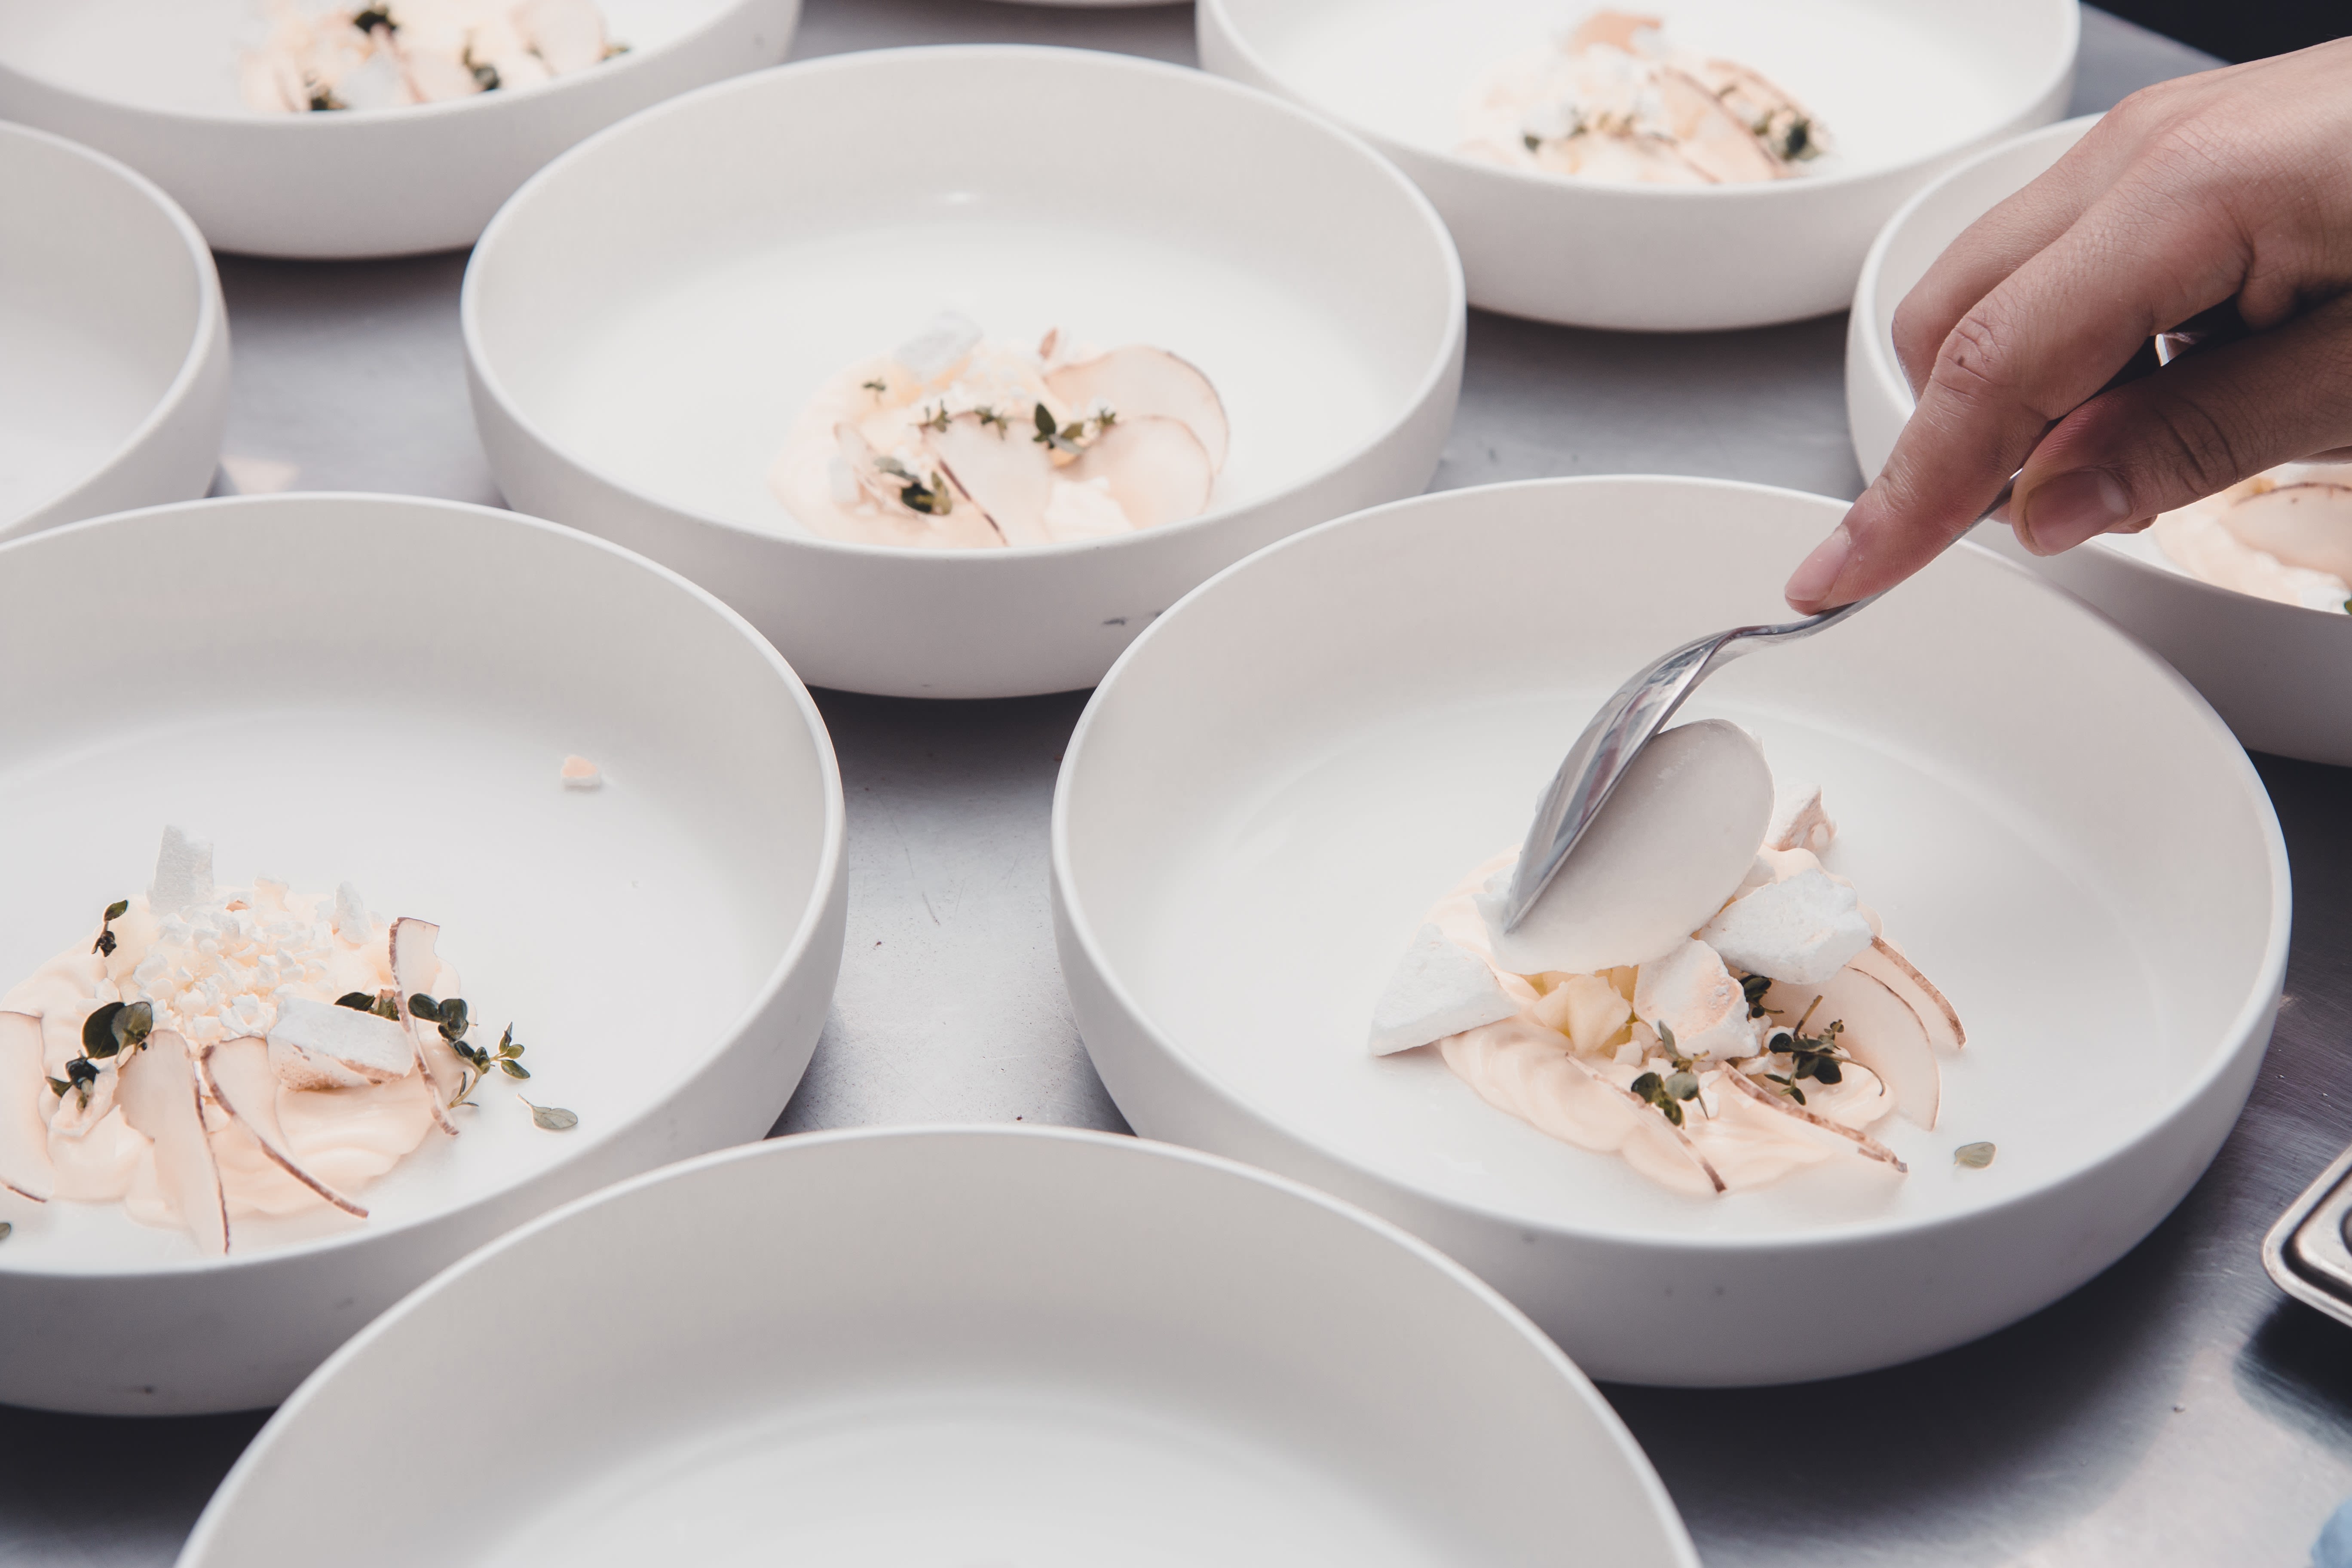 a collection of white bowl-like plates with a white and cream coloured dish in it